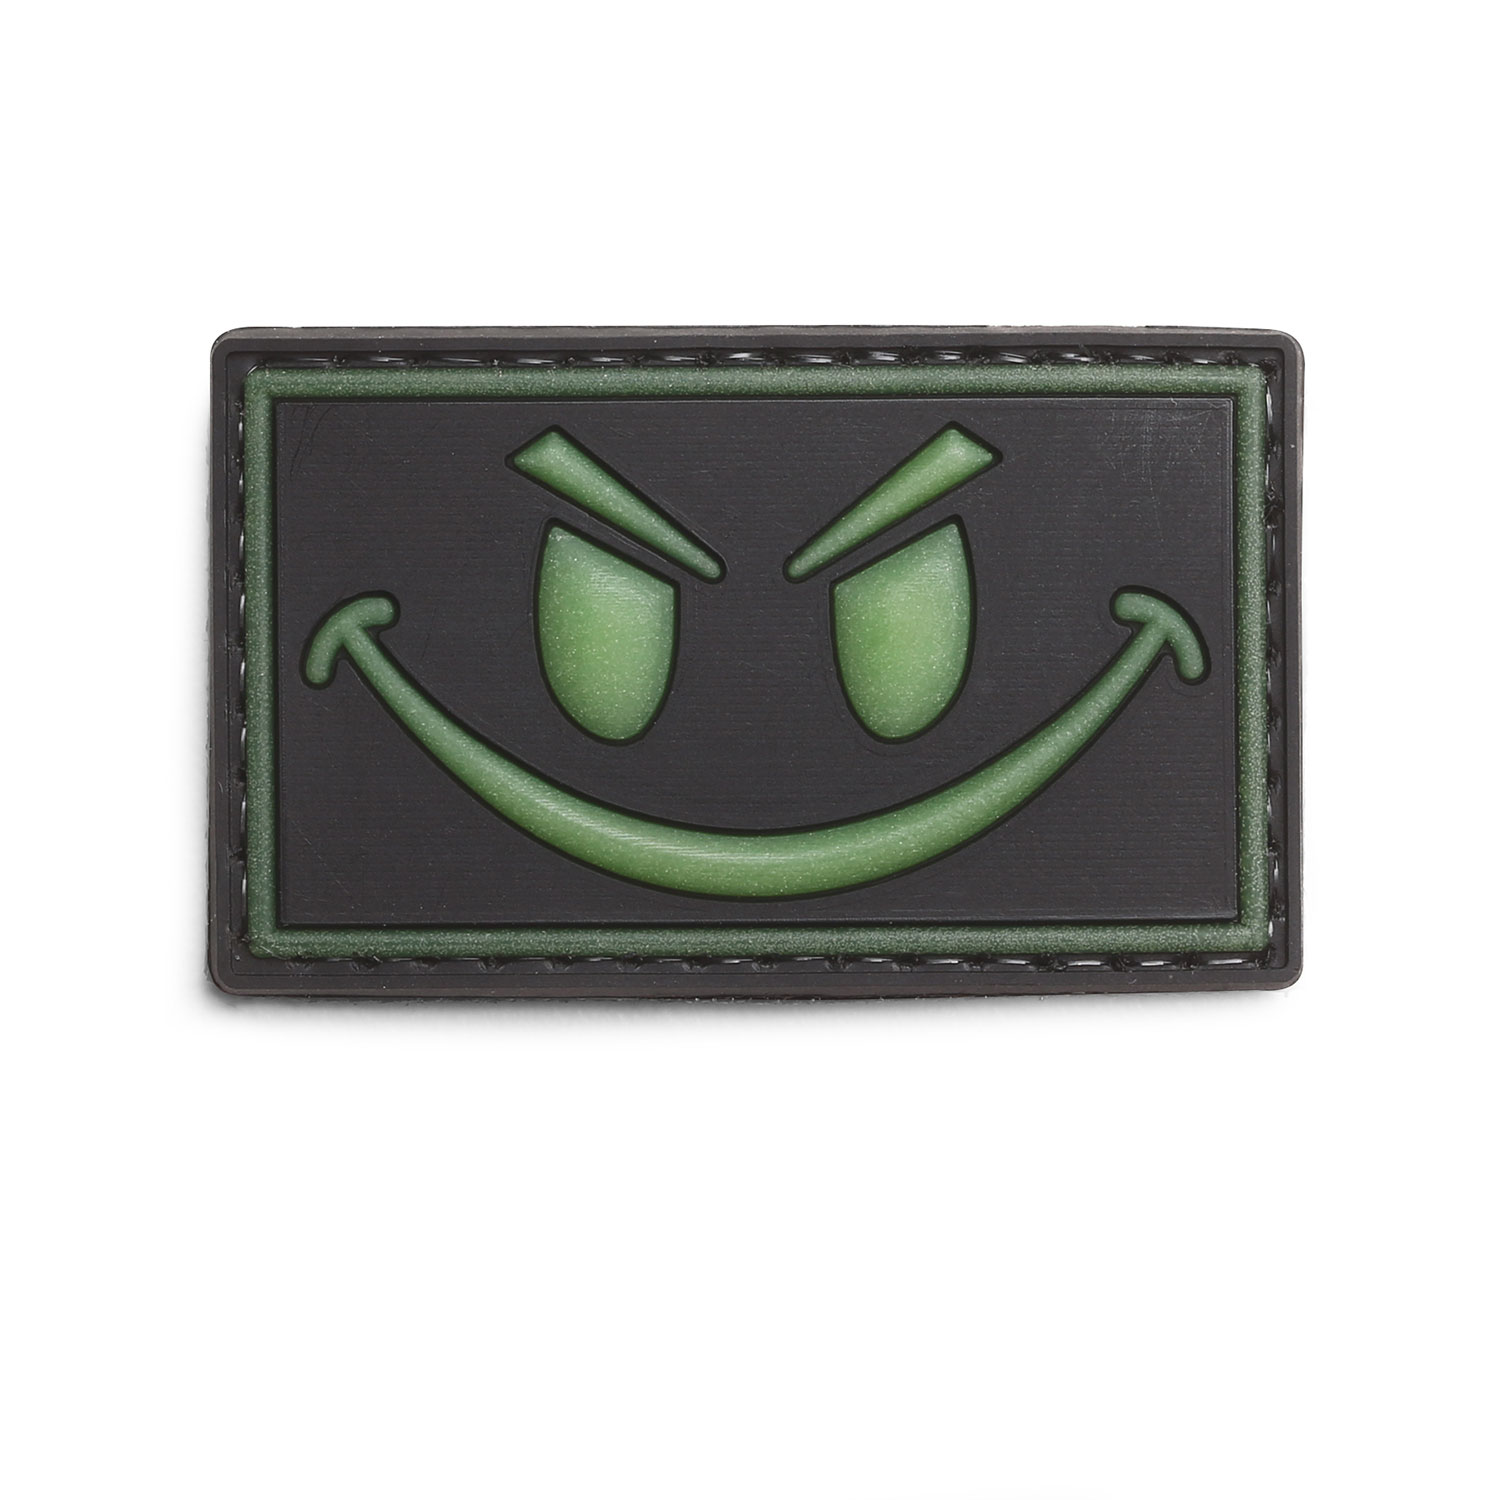 5ive Star Gear “Glow Smile” Morale Patch